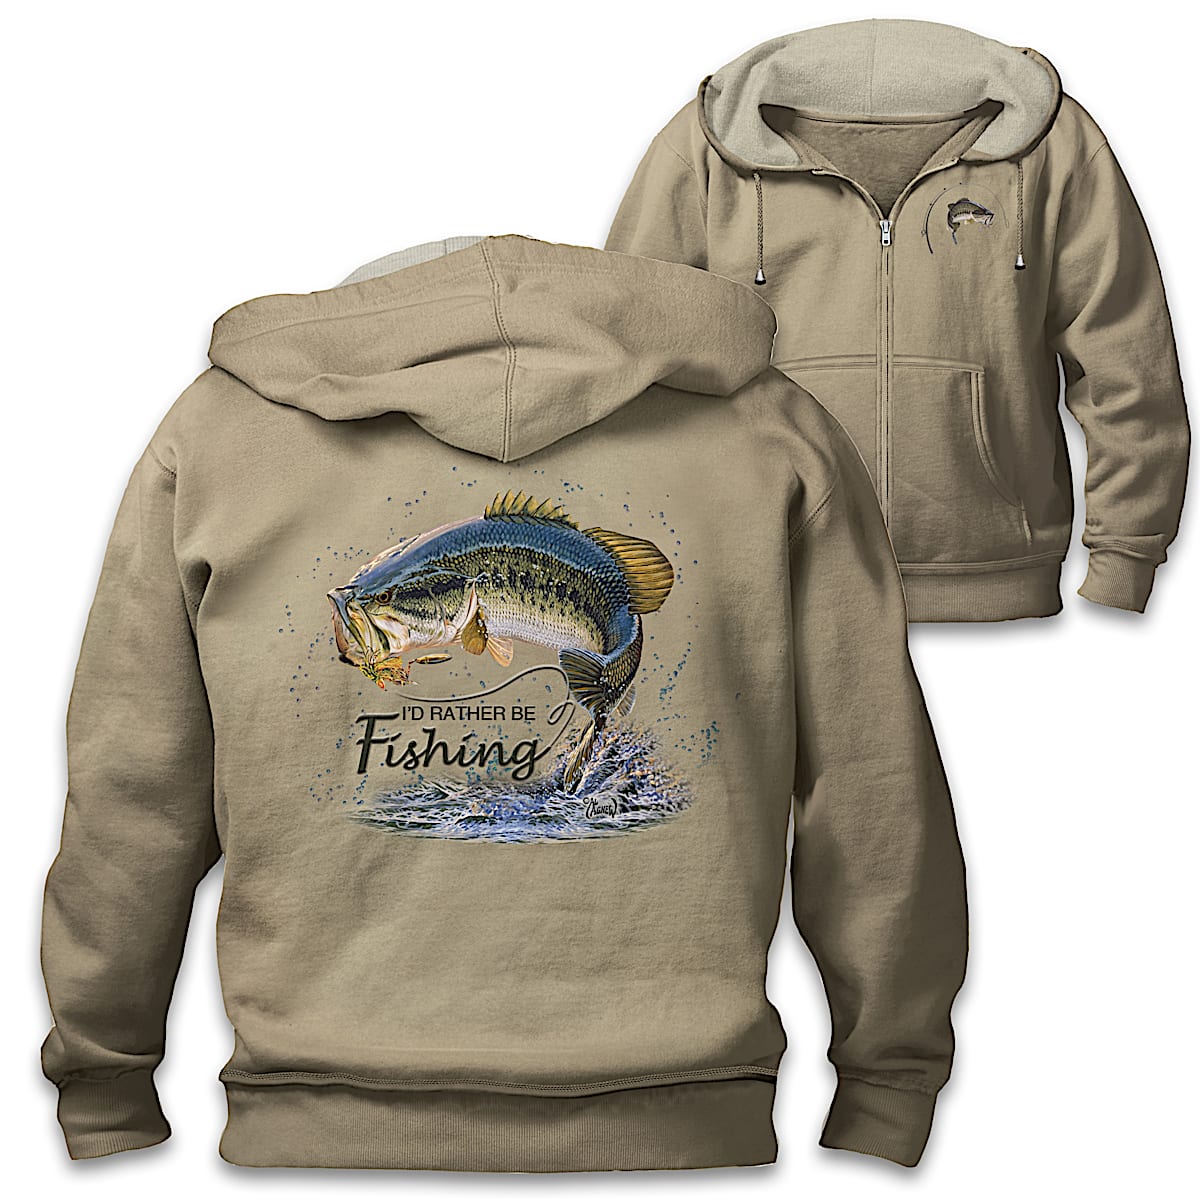 Fish On! Mens Full-Zip Hoodie Featuring Fishing Art By Artist Al Agnew With  An Avid Anglers Favorite Sentiment Id Rather Be Fishing On The Back